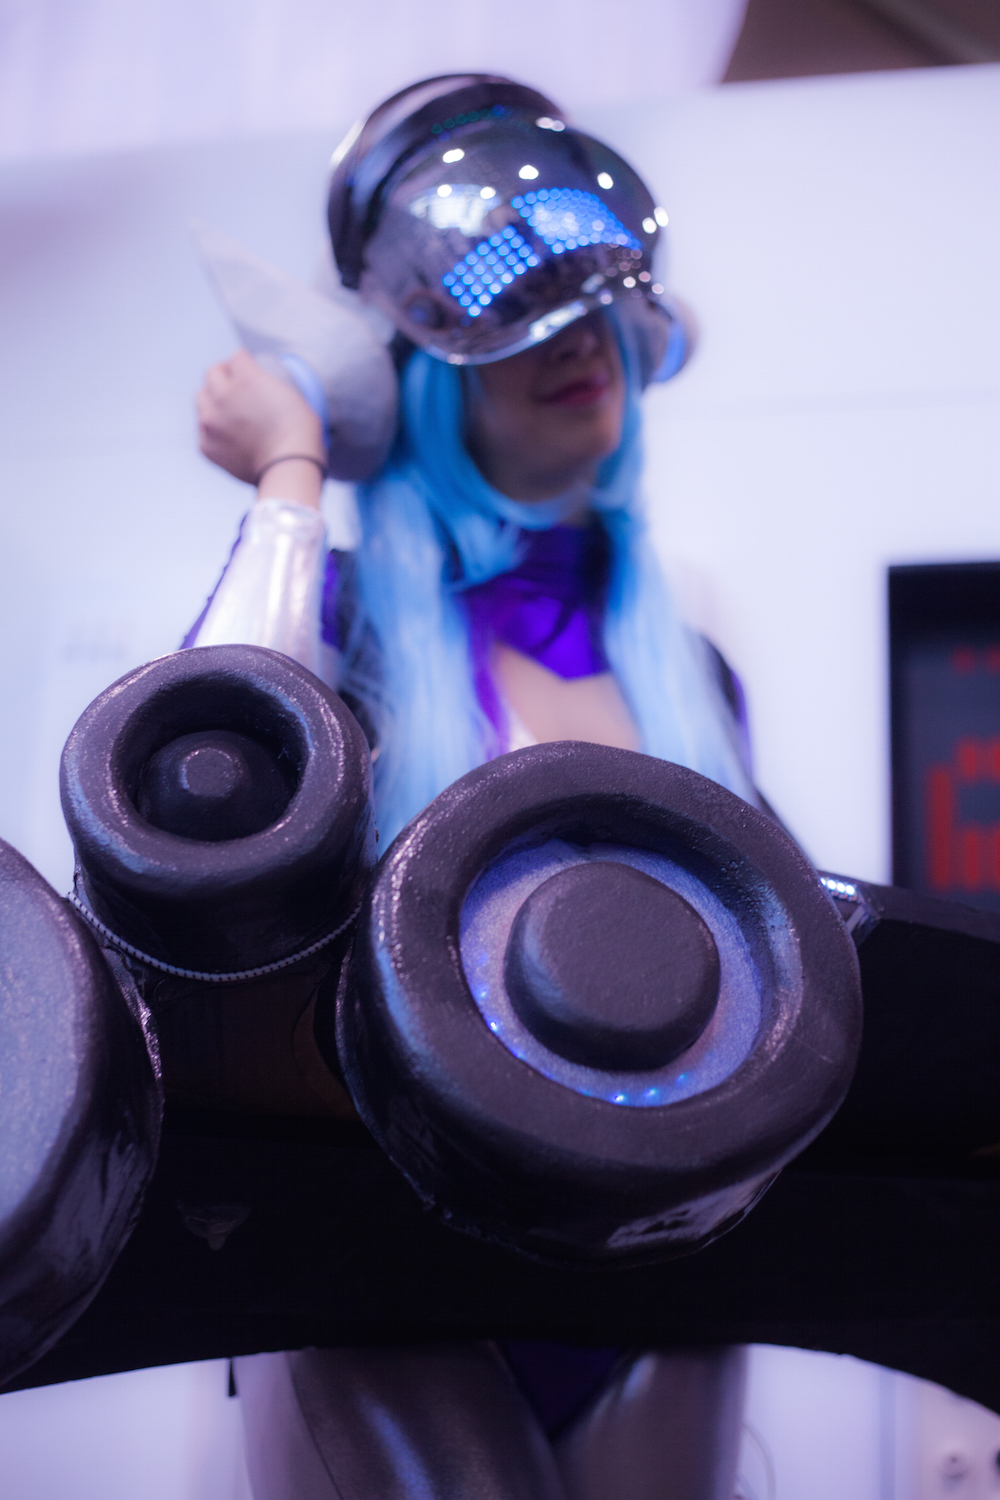 DJ Sona from League of Legends cosplay photographs